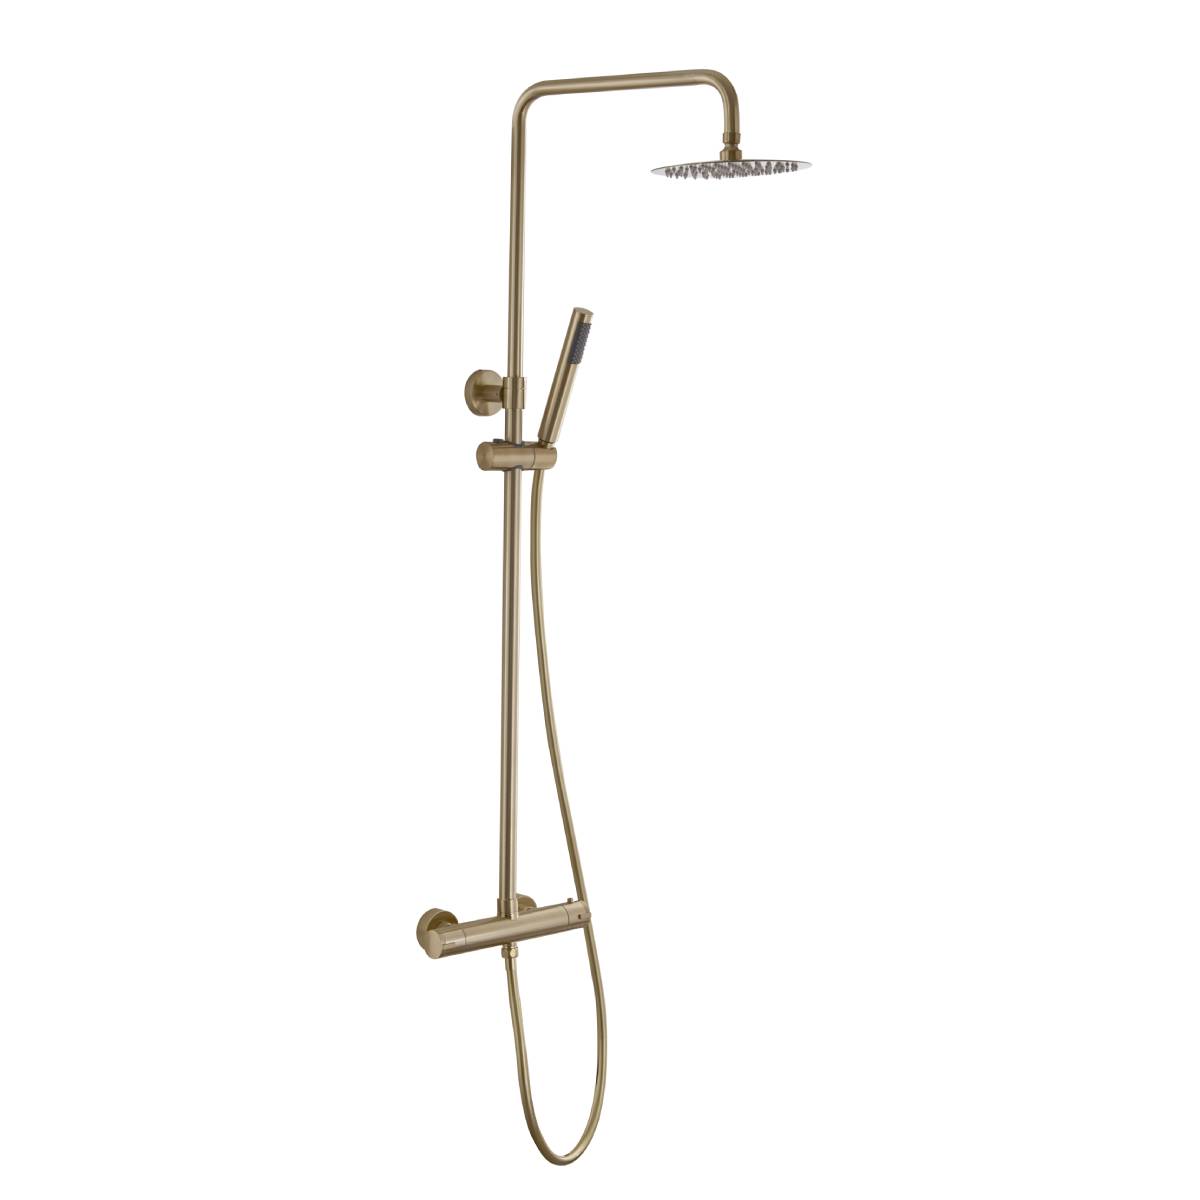 Eliseo Ricci Curve Plus Thermostatic Rain Shower with Diverter - Brushed Brass (15676)